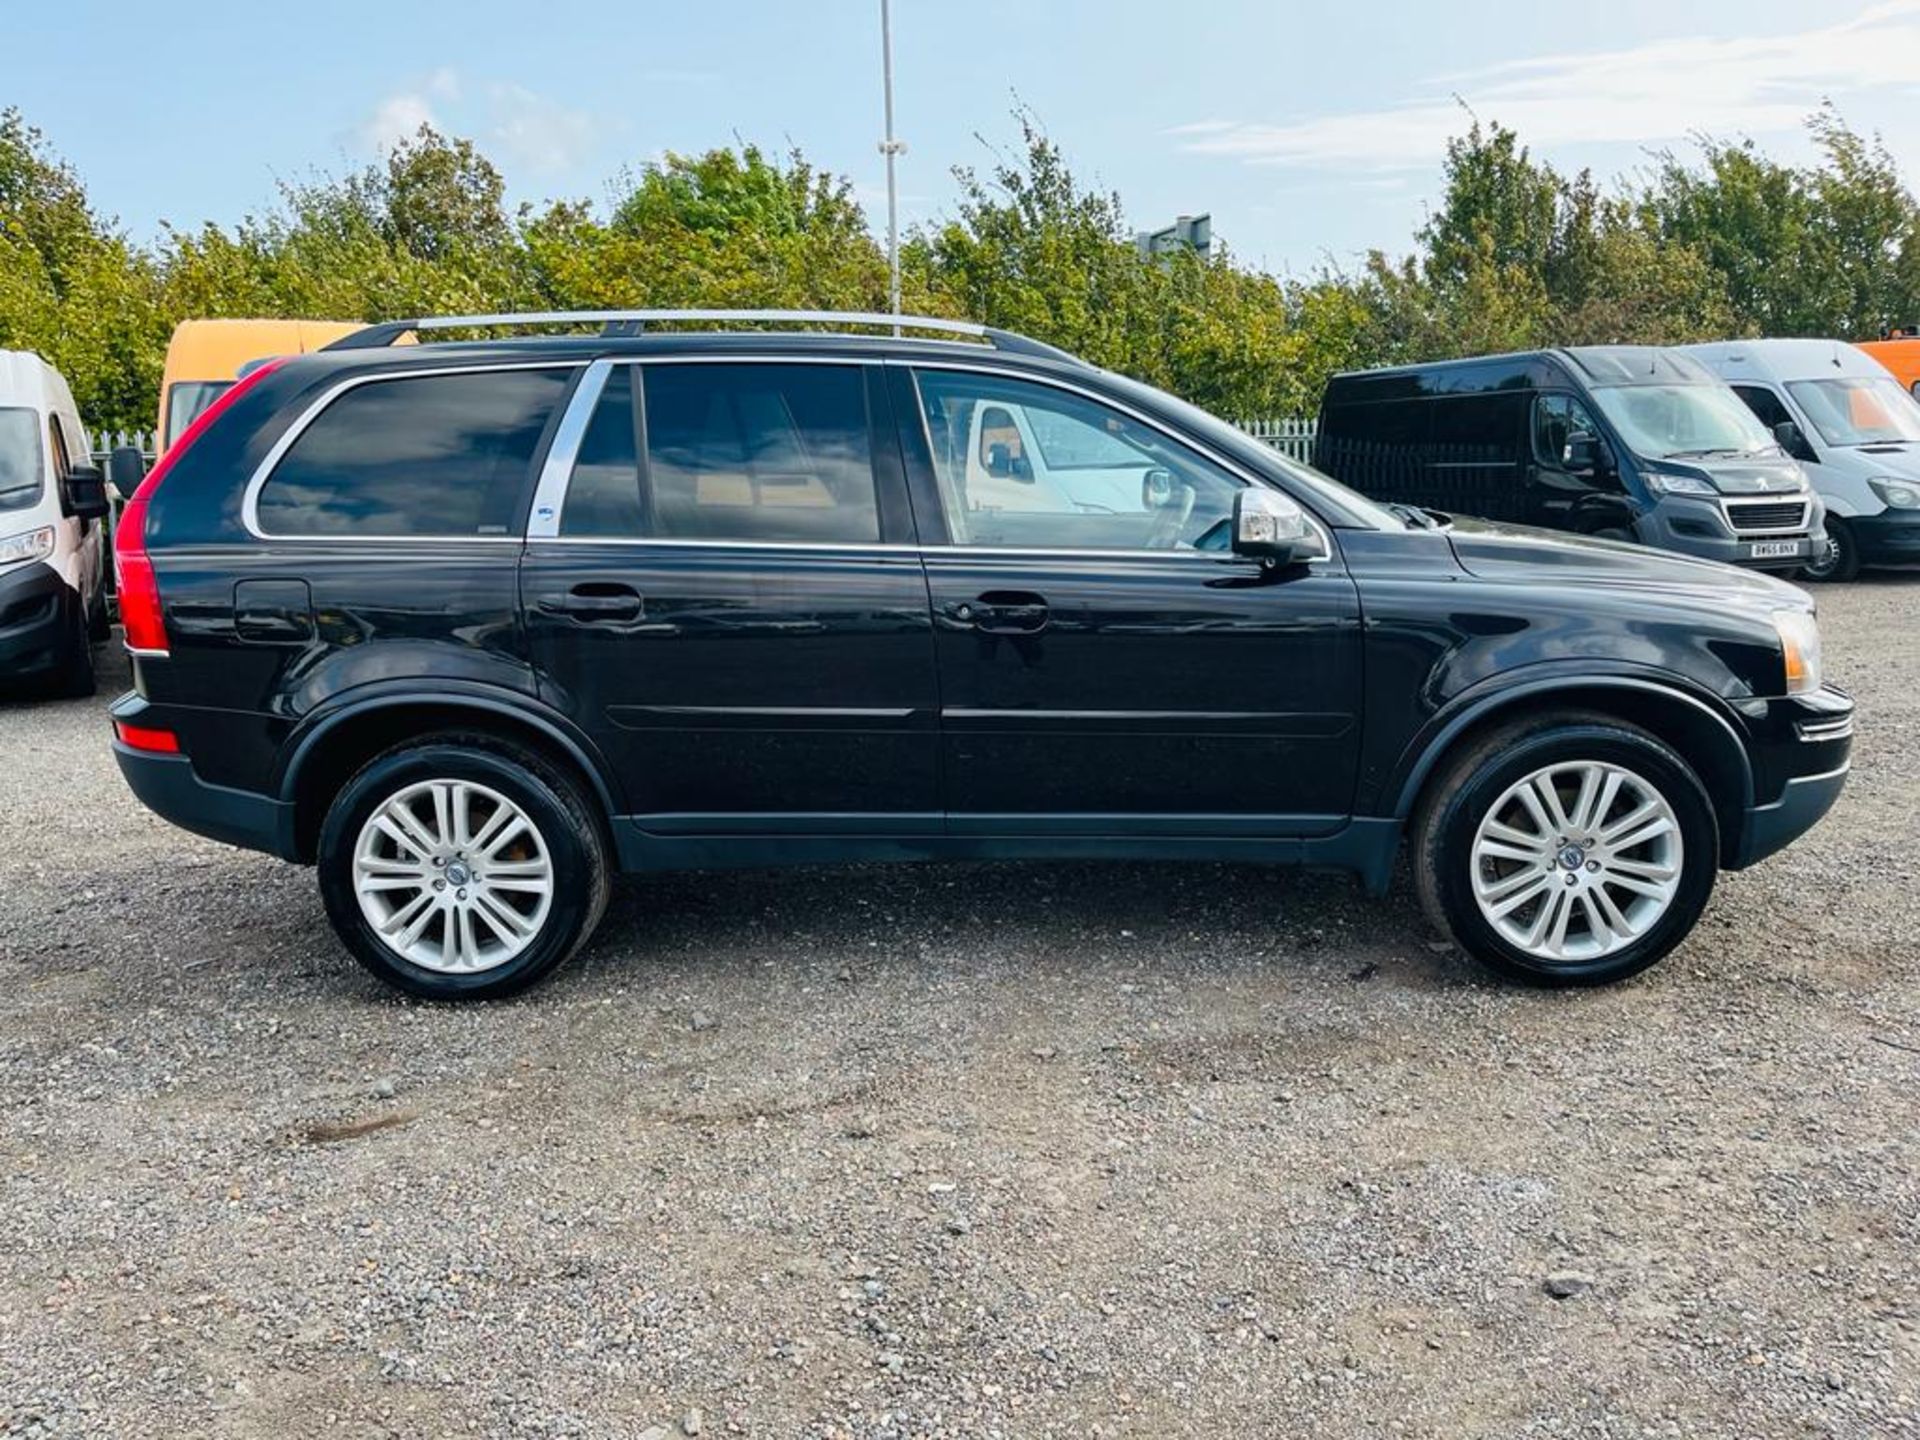 ** ON SALE ** Volvo XC90 2.4 D5 185 Executive G/T Estate 2009 '59 plate' - Climate Control - No Vat - Image 4 of 30